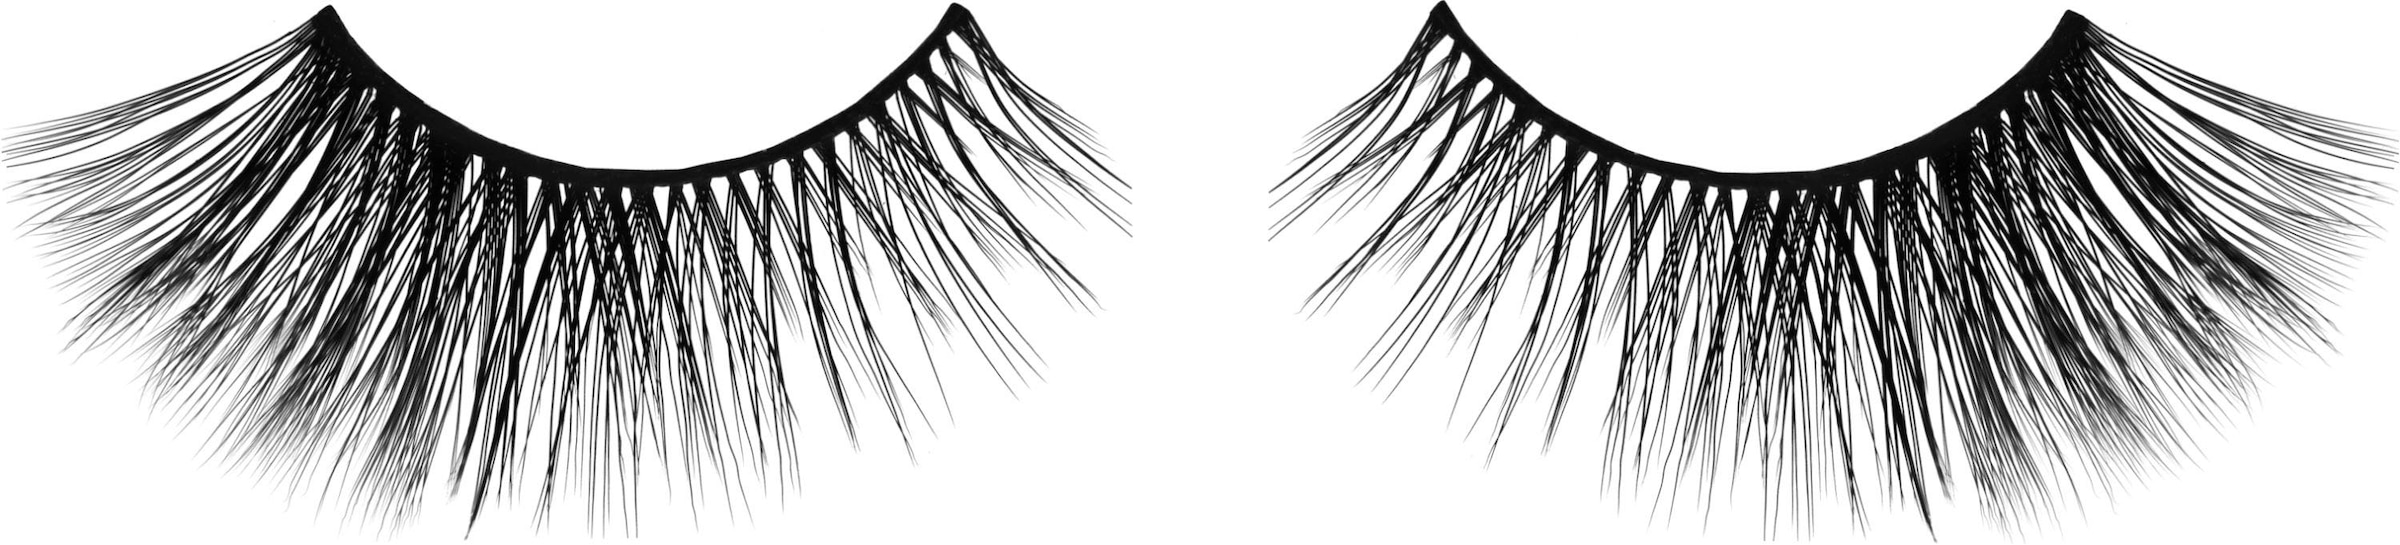 Catrice Bandwimpern 3 3D Lashes«, online bei tlg.) Lift (Set, High »Faked UNIVERSAL